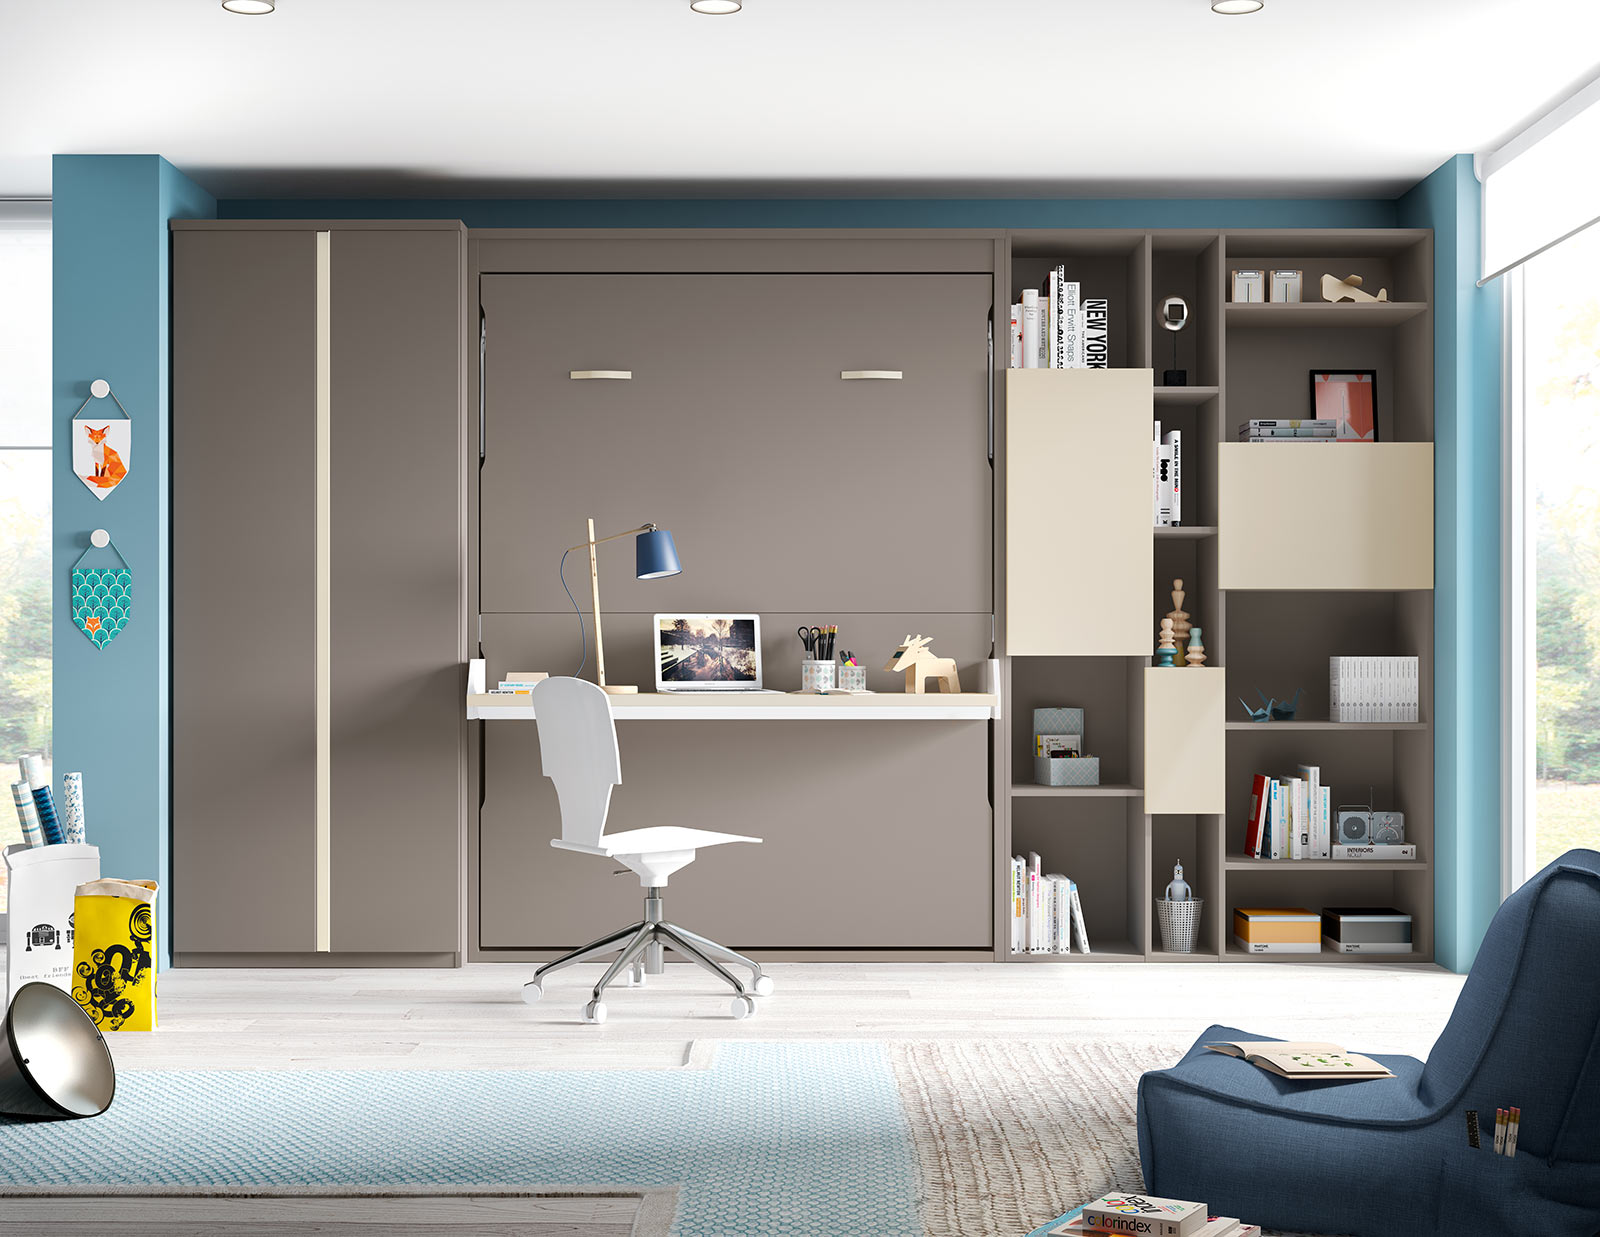 Space Deskbed The London Wallbed Company, Vertical Murphy Bed With Desk Uk